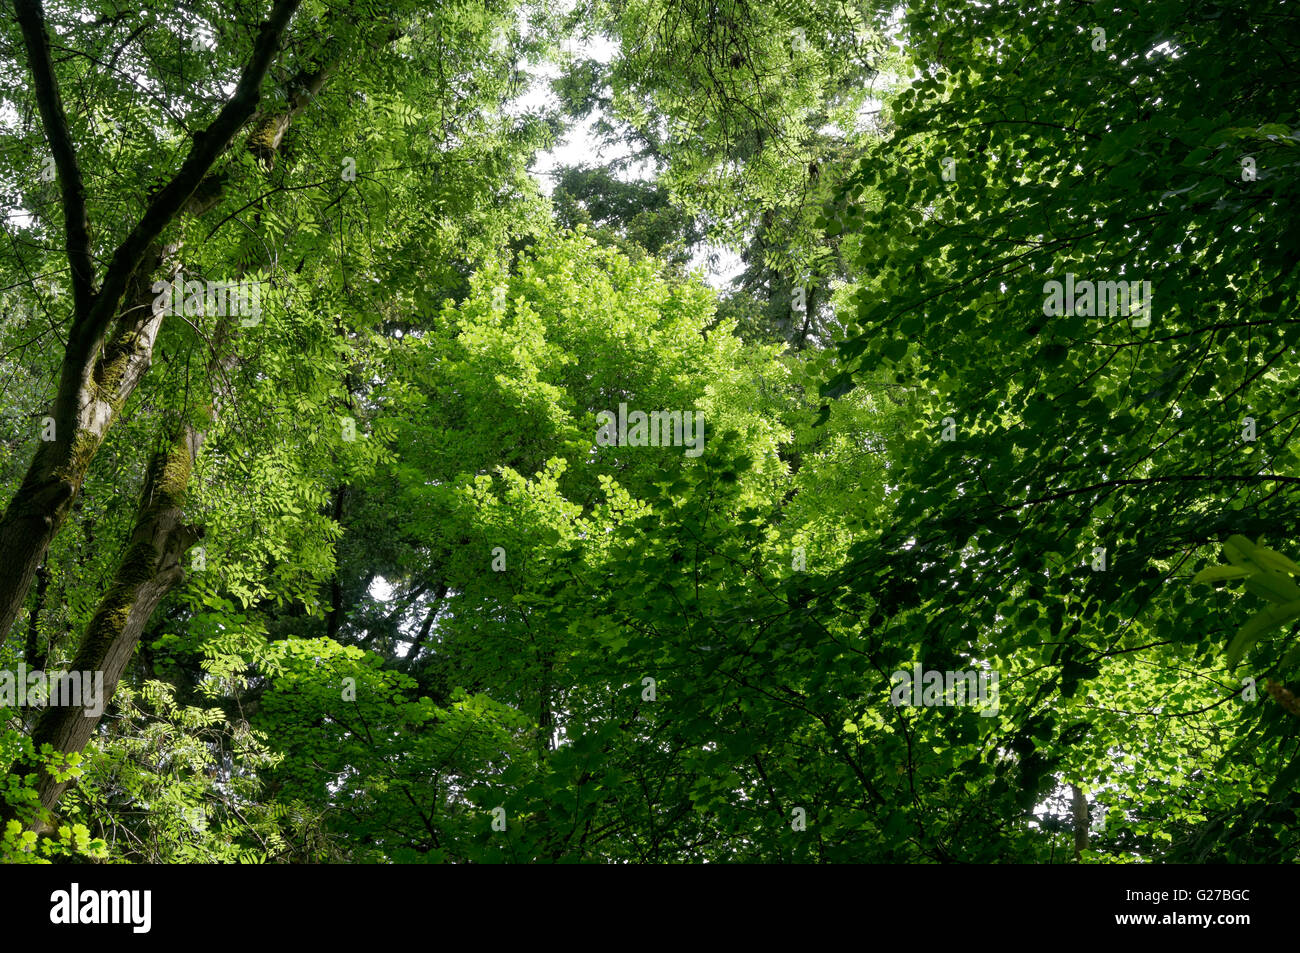 looking-up-into-the-green-canopy-of-a-te